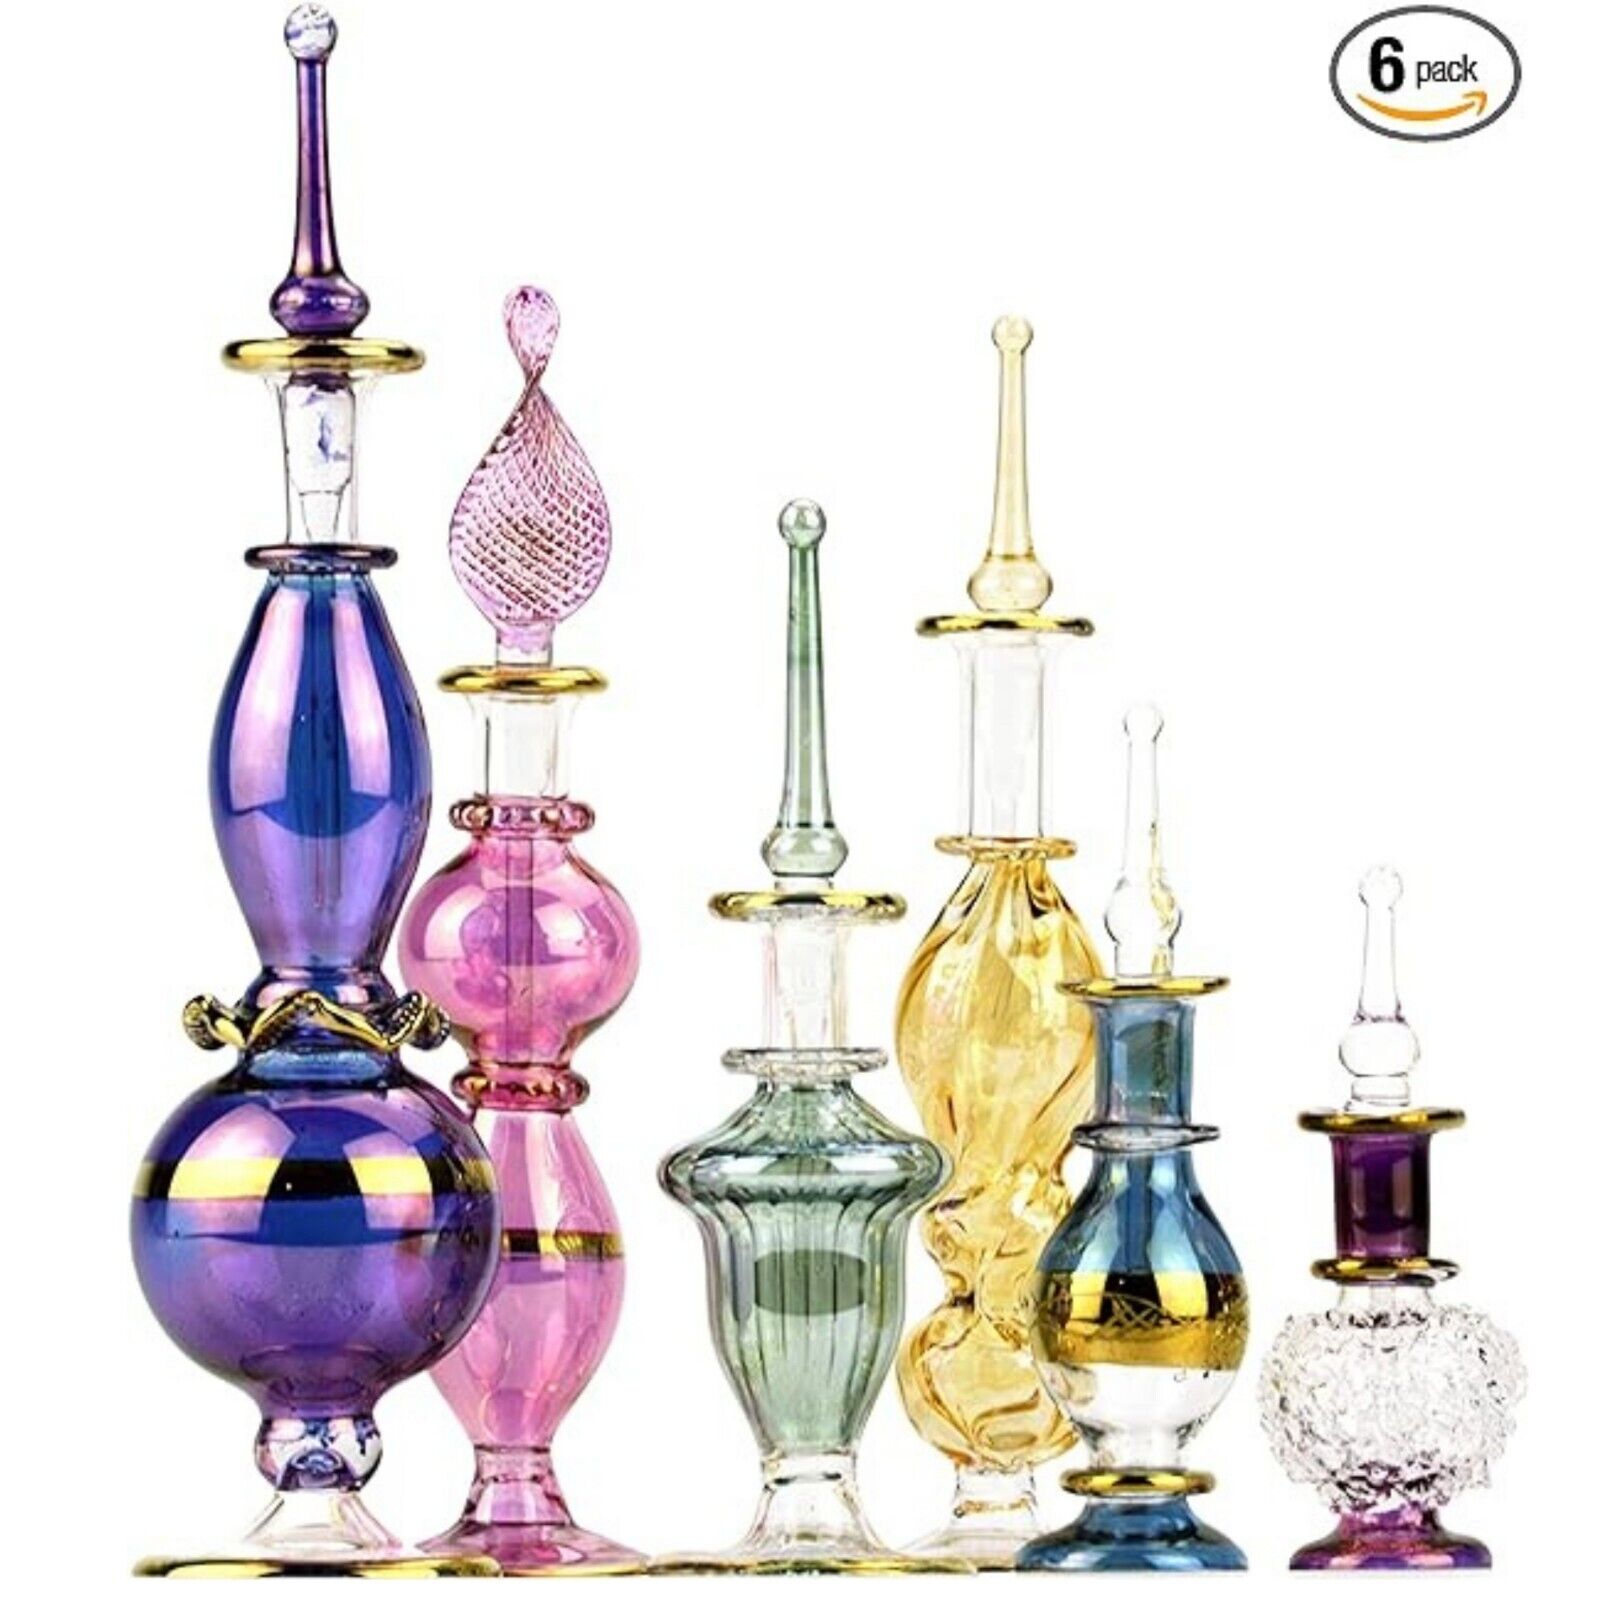 Egyptian Perfume Bottles 2-5 in Collection Set of 6 Mouth-Blown Decorative Glass